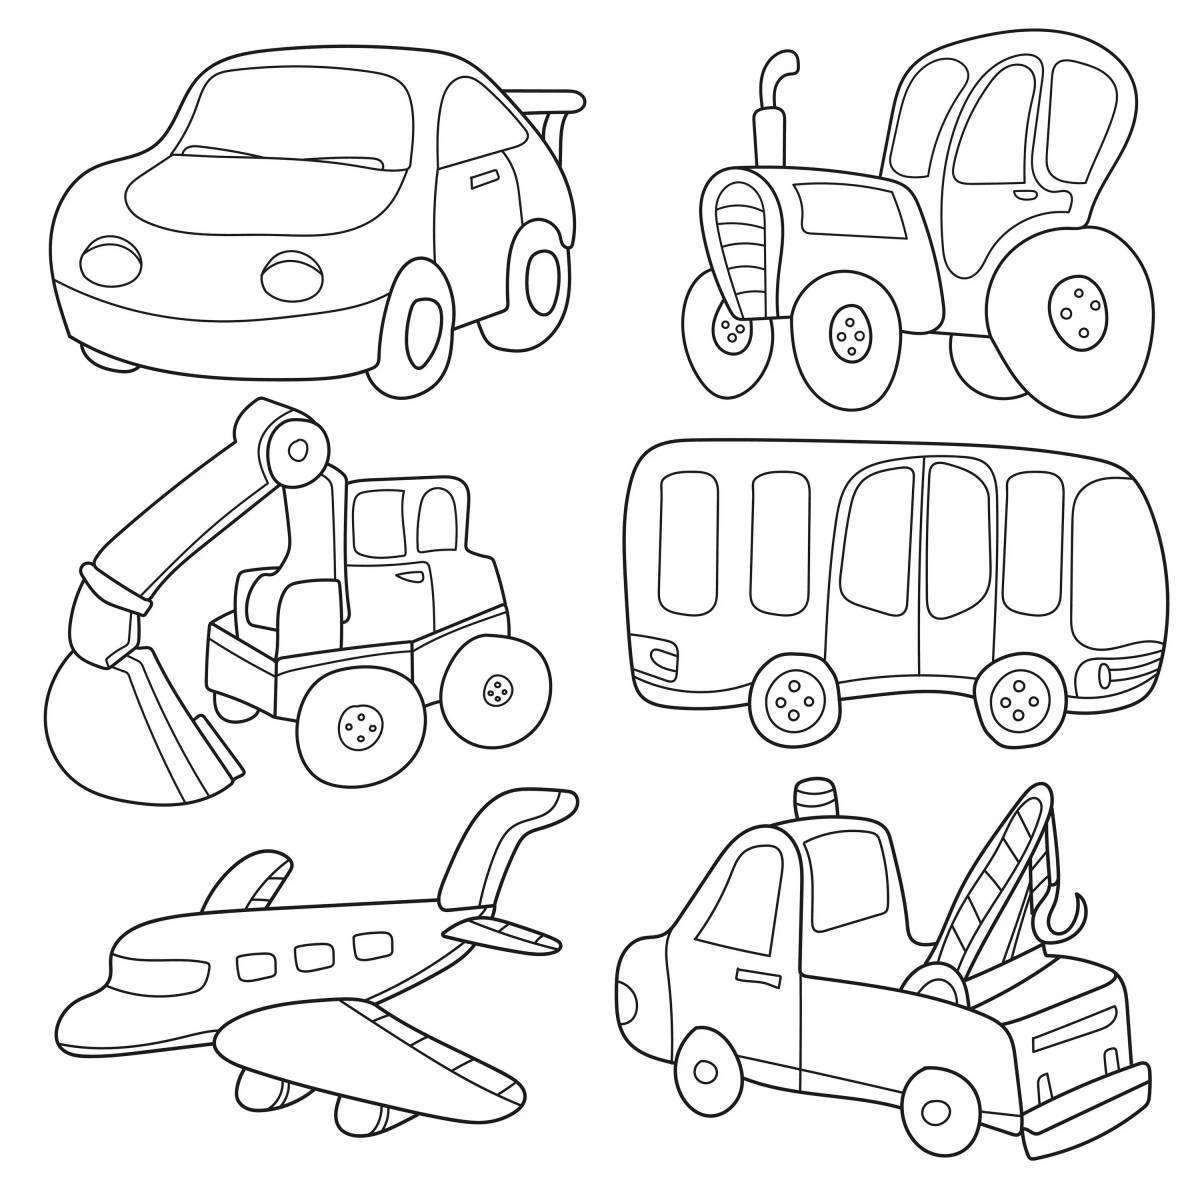 Colorful bright coloring book for preschoolers modes of transport